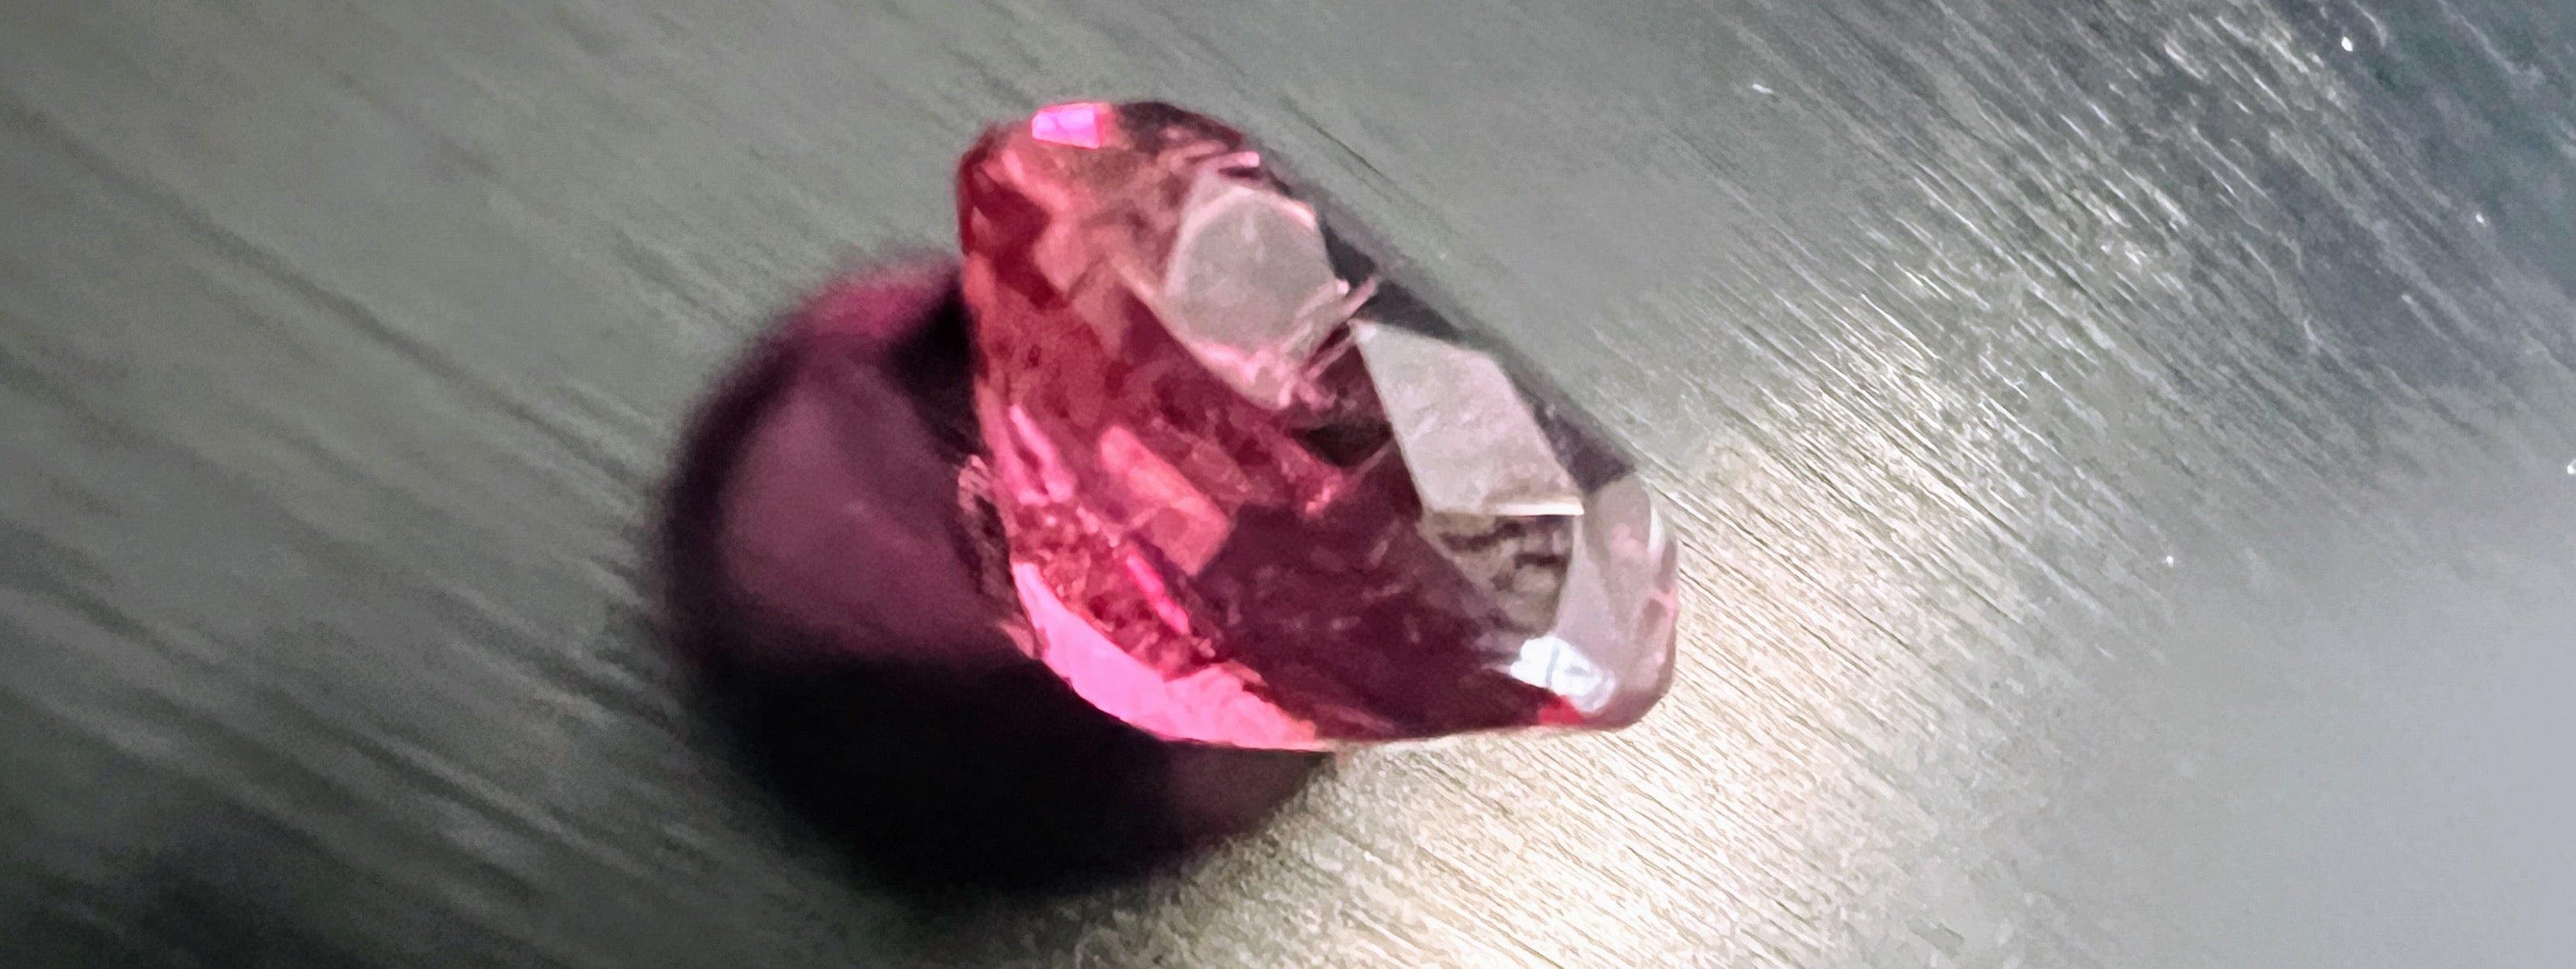 Oval Cut 9.60ct Oval Dramatic Pink Rubellite Tourmaline Loose Gemstone For Sale